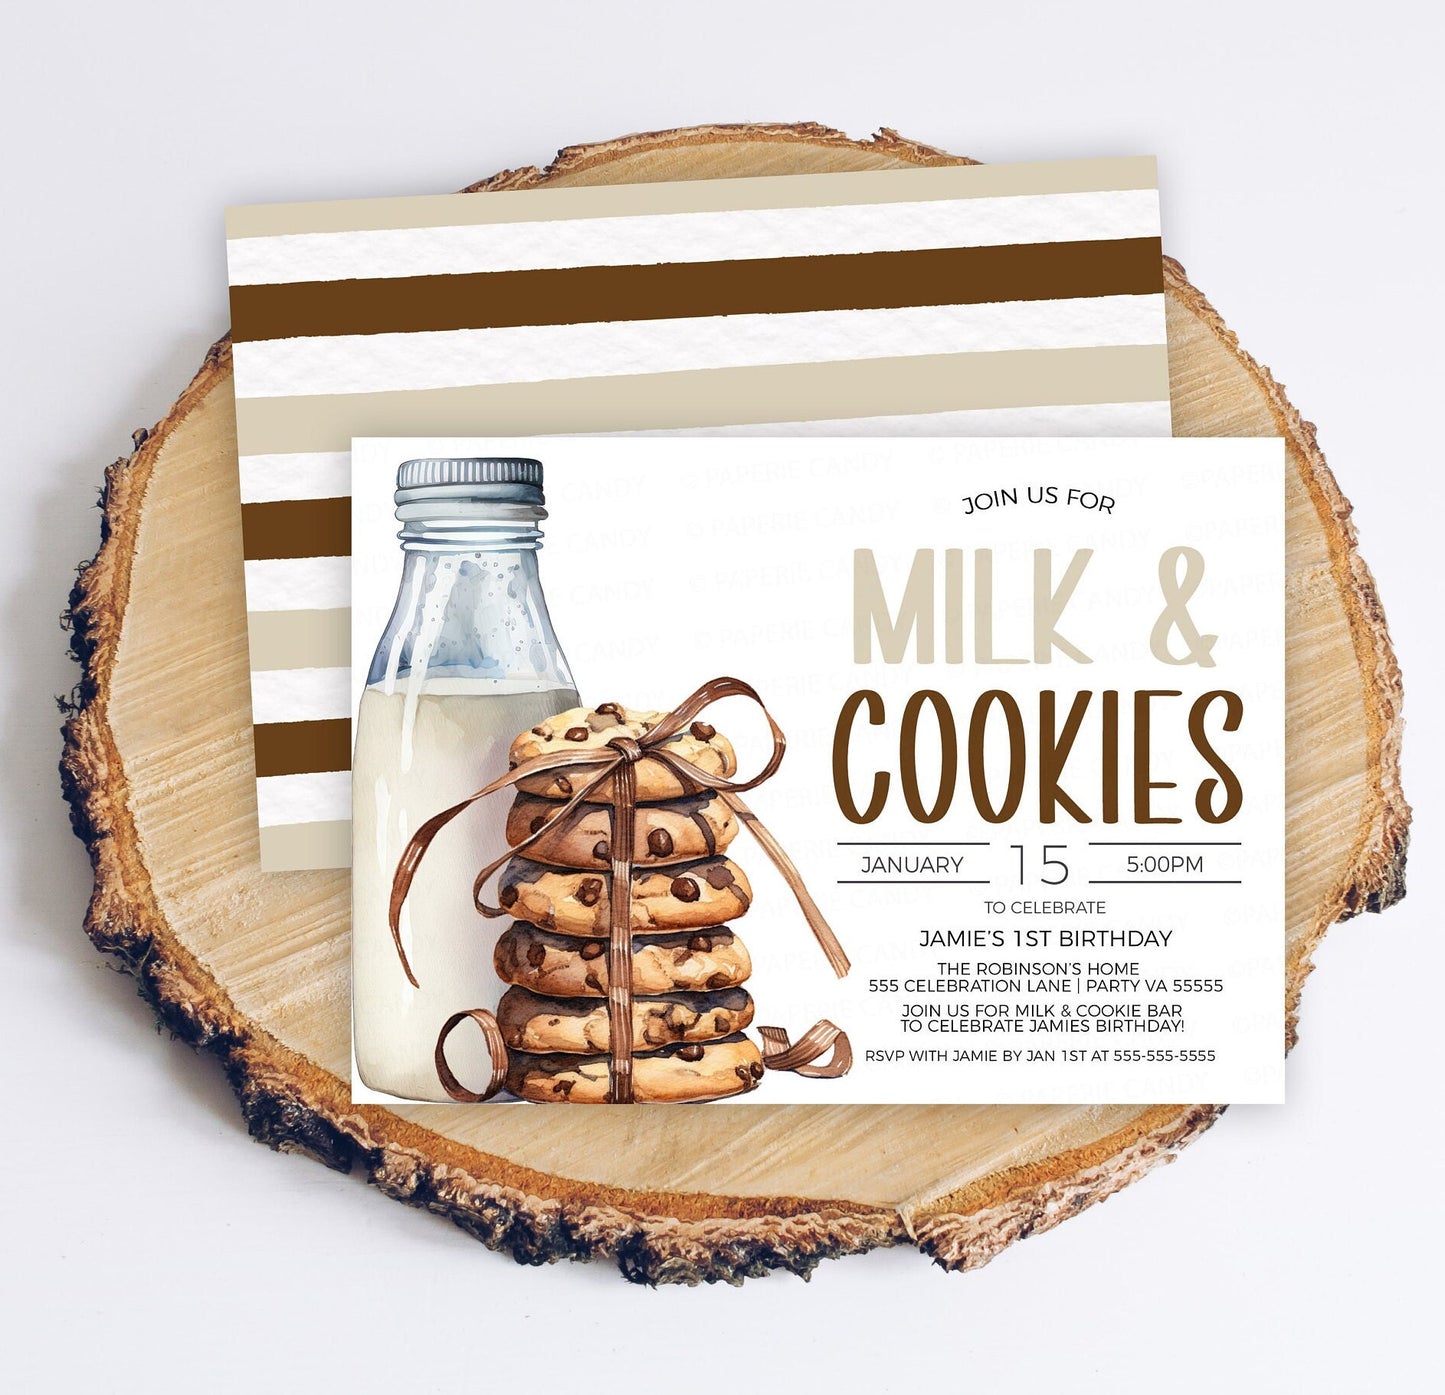 Milk And Cookies Party Invitation, Milk & Cookie Invite, Milk And Cookies Birthday, Boy Girl Twins, Milk And Cookies Celebration, Editable